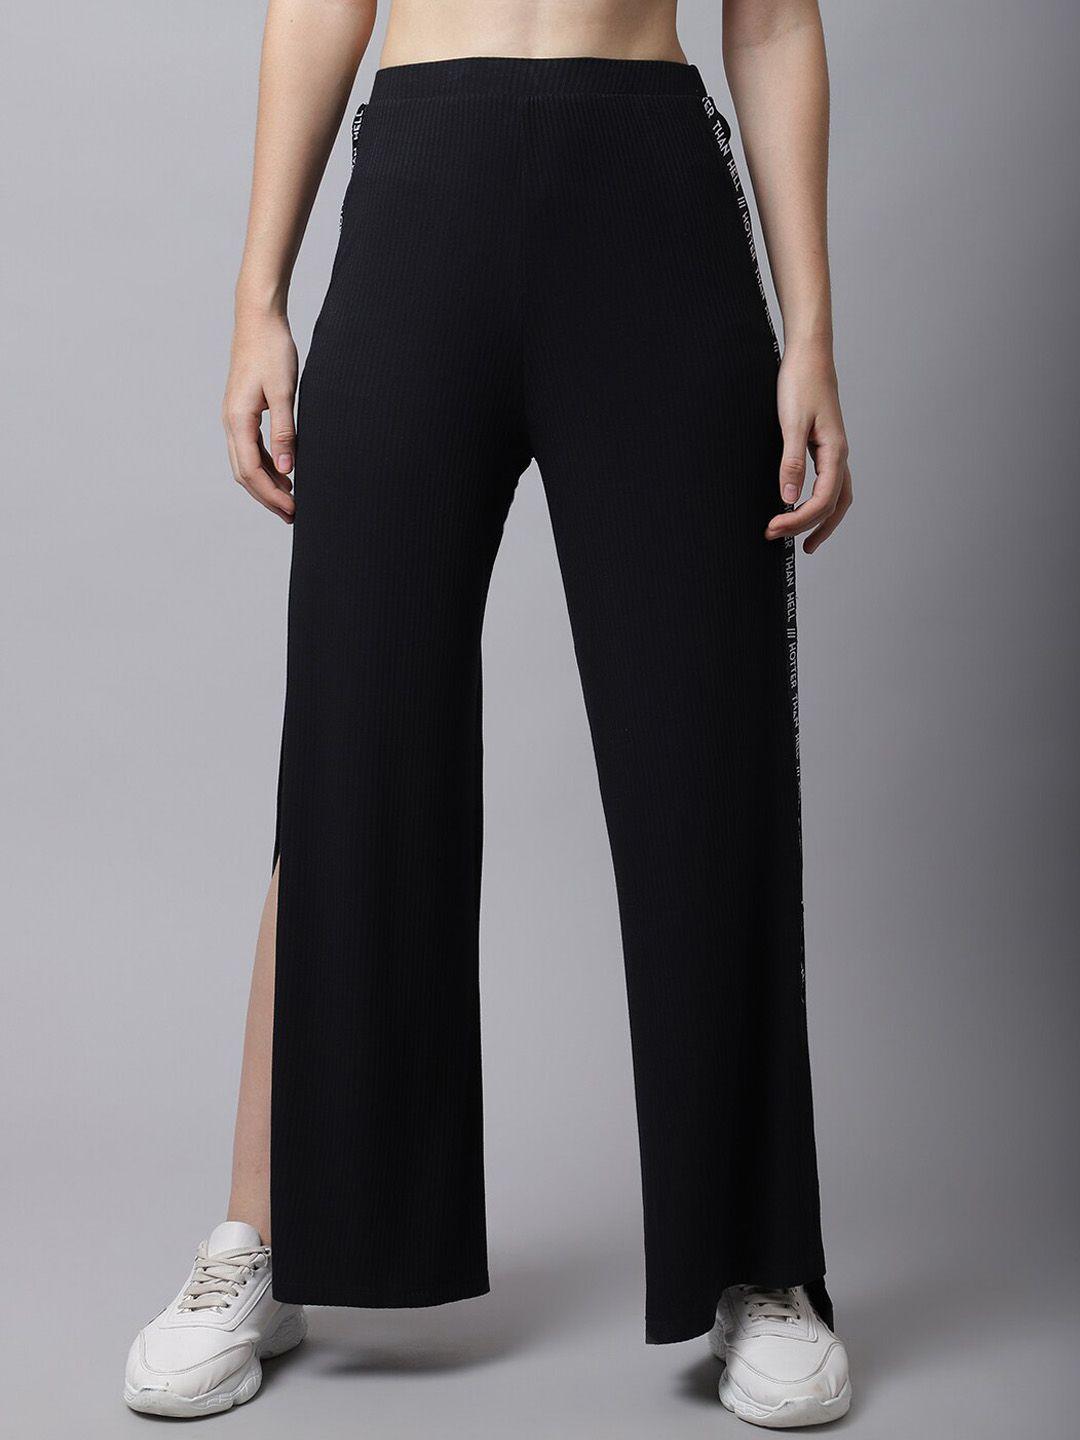 door74-women-ribbed-with-side-print-detail-rapid-dry-track-pants